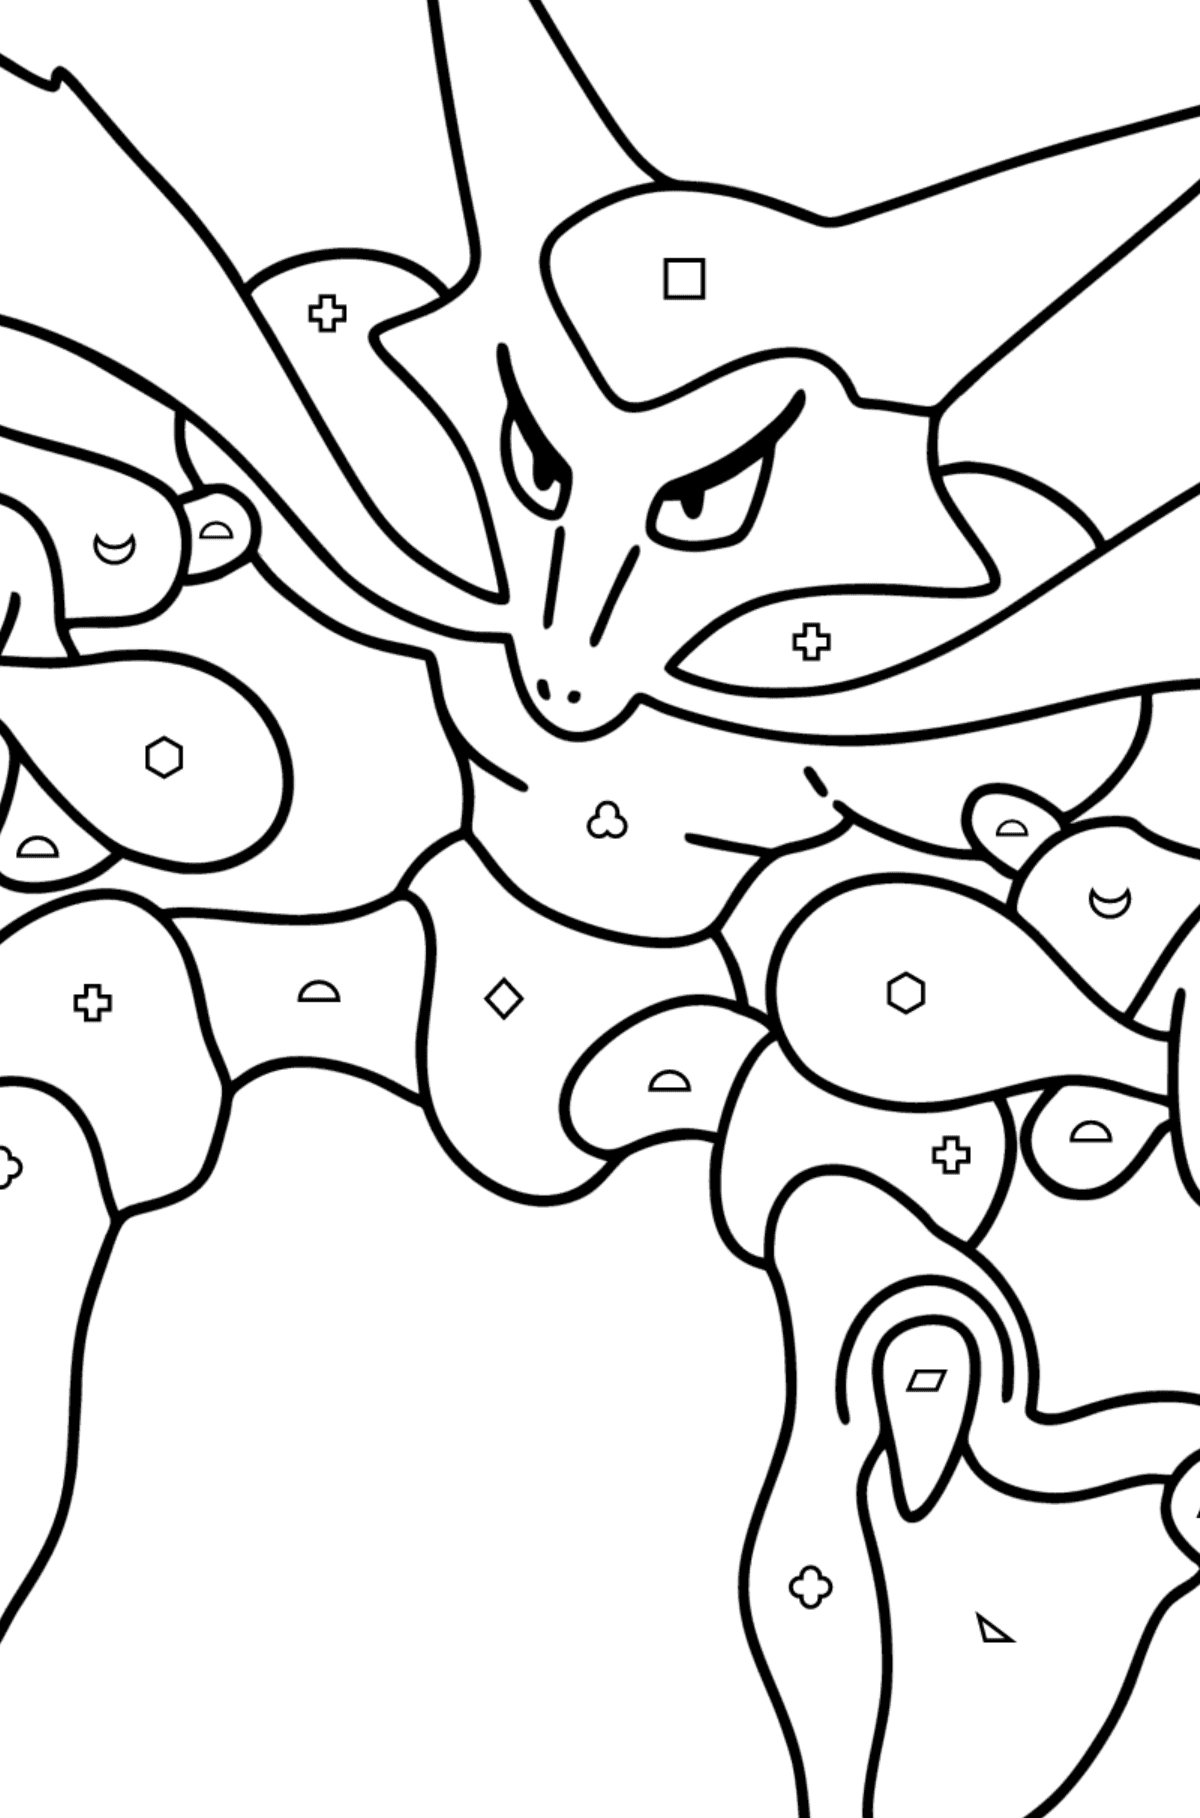 Coloring page Pokemon Go Alakazam - Coloring by Geometric Shapes for Kids